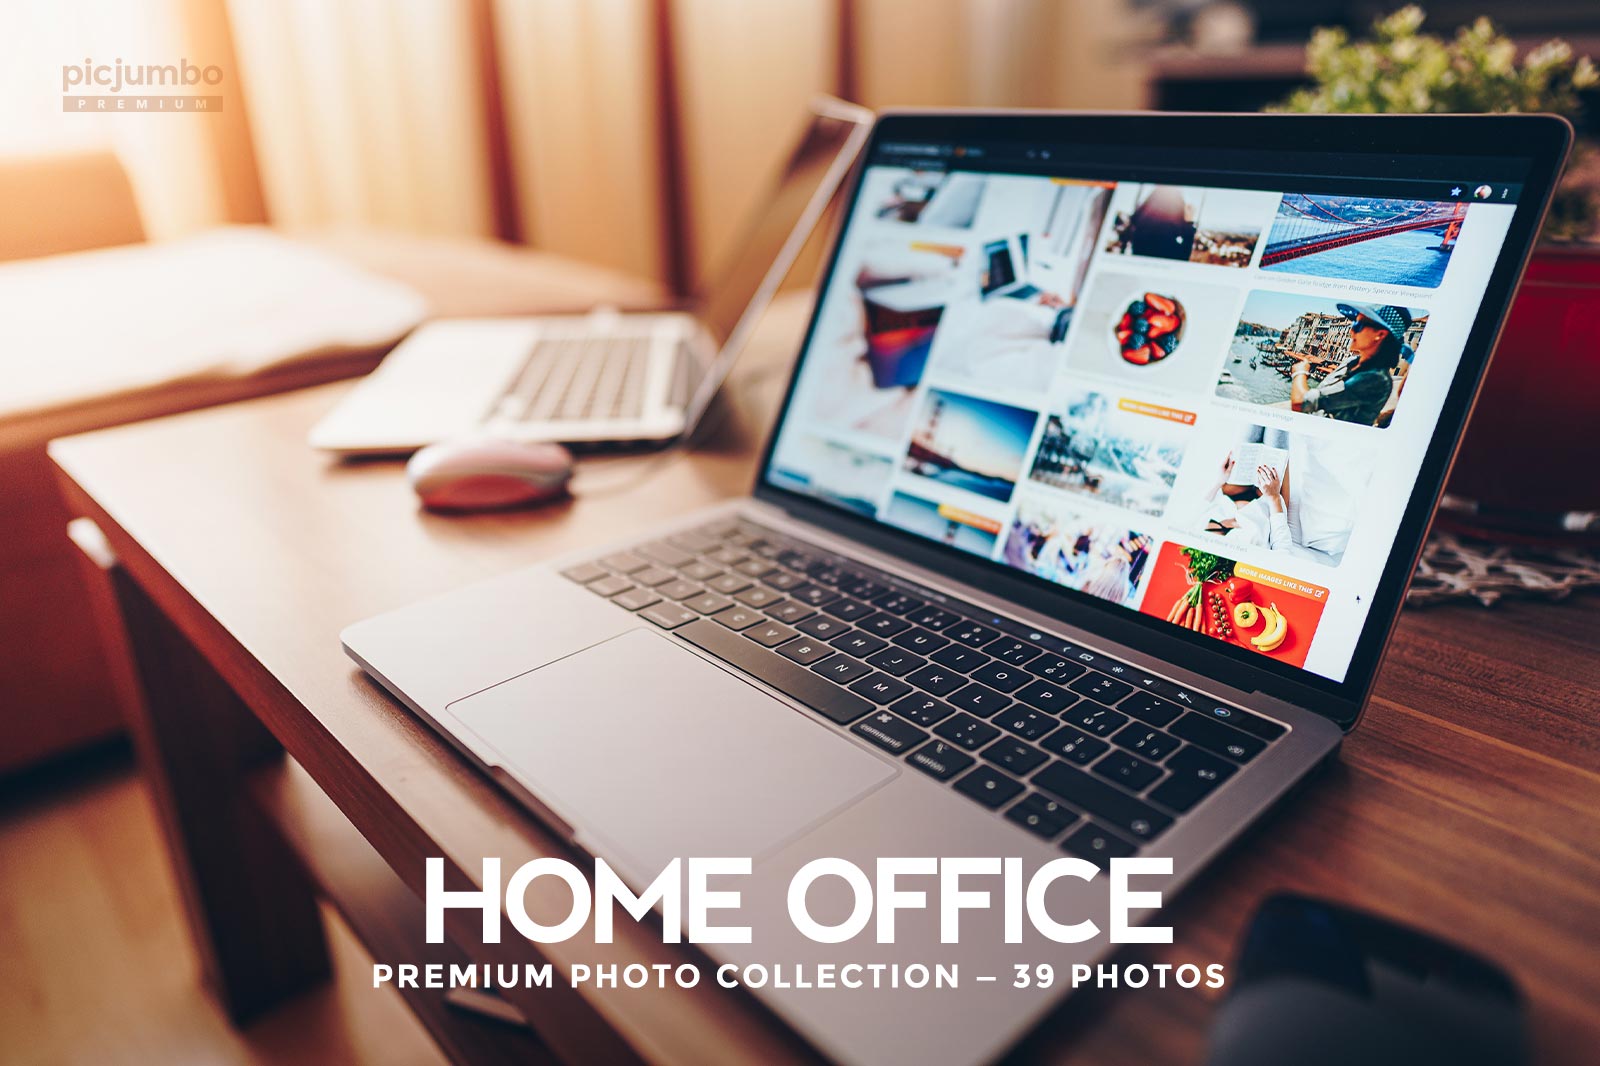 Download hi-res stock photos from our Home Office PREMIUM Collection!